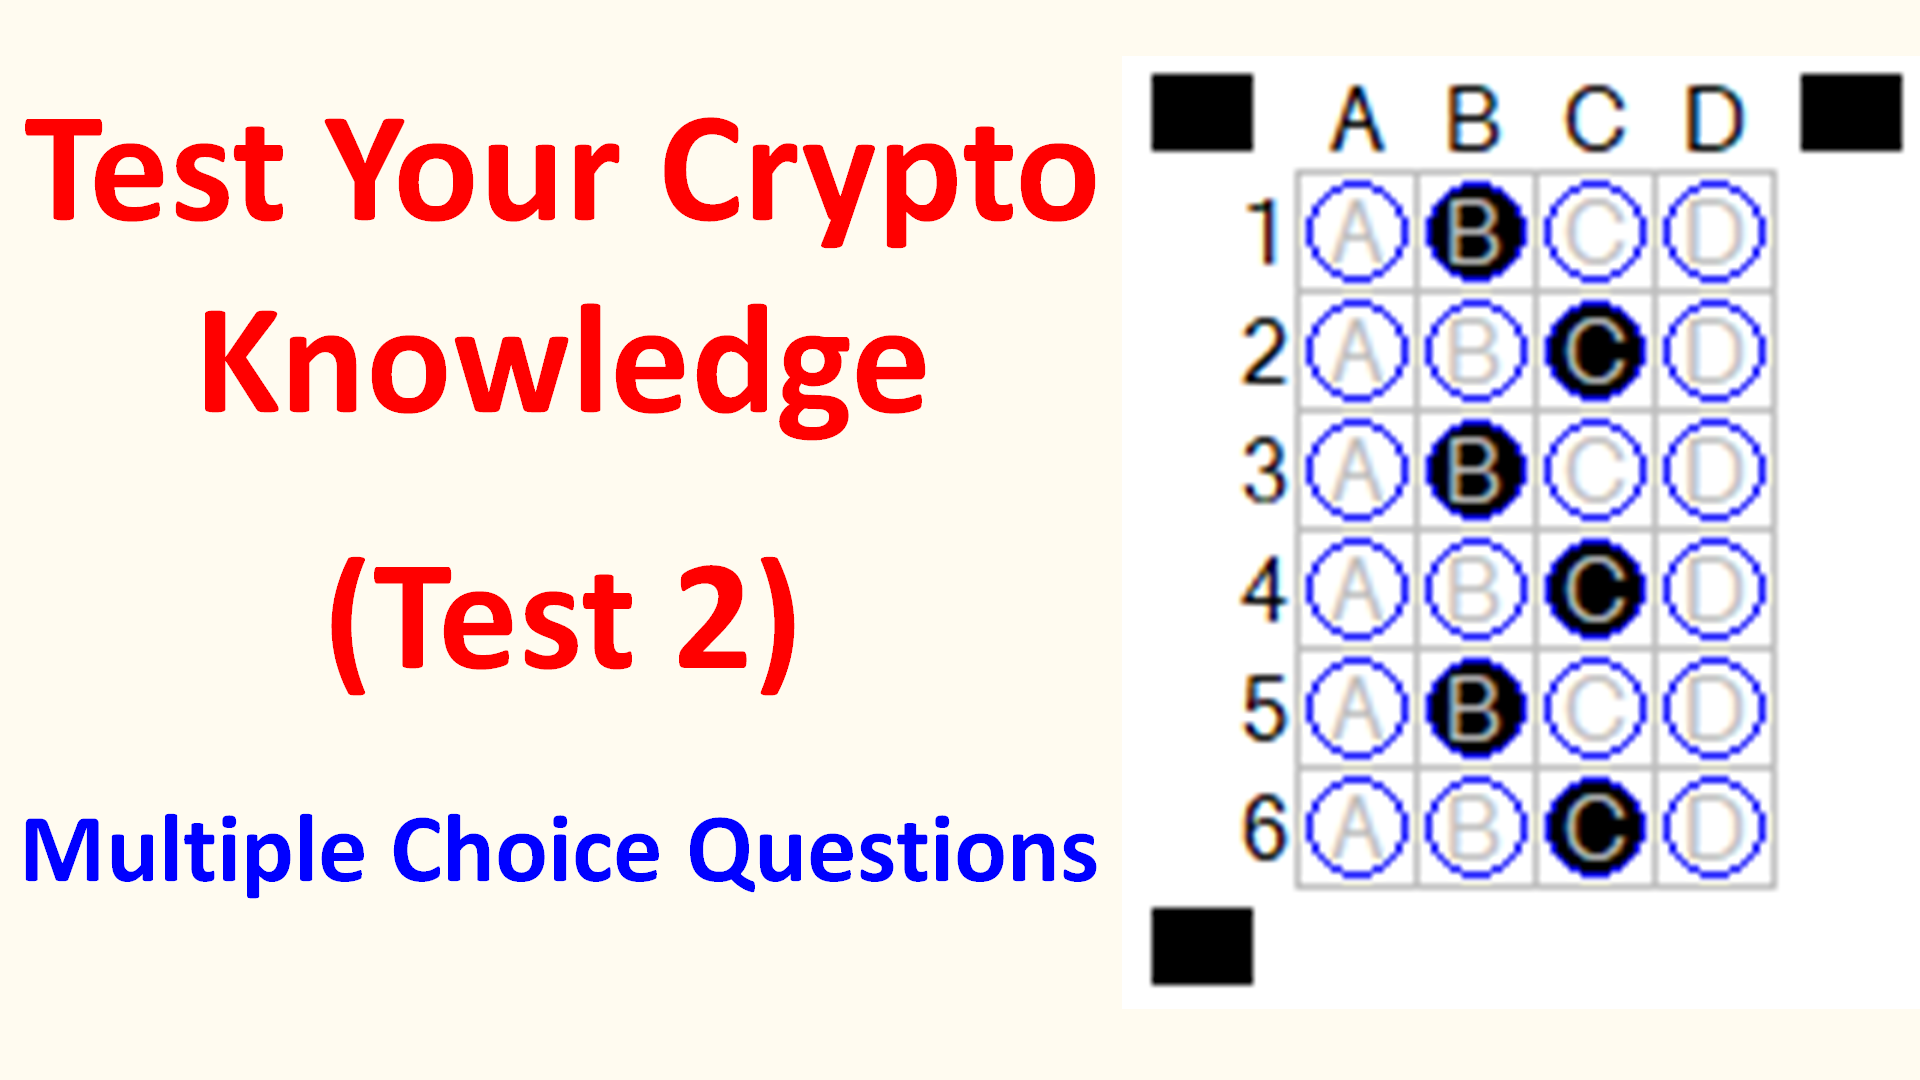 Test Your Crypto Knowledge (Test 2)